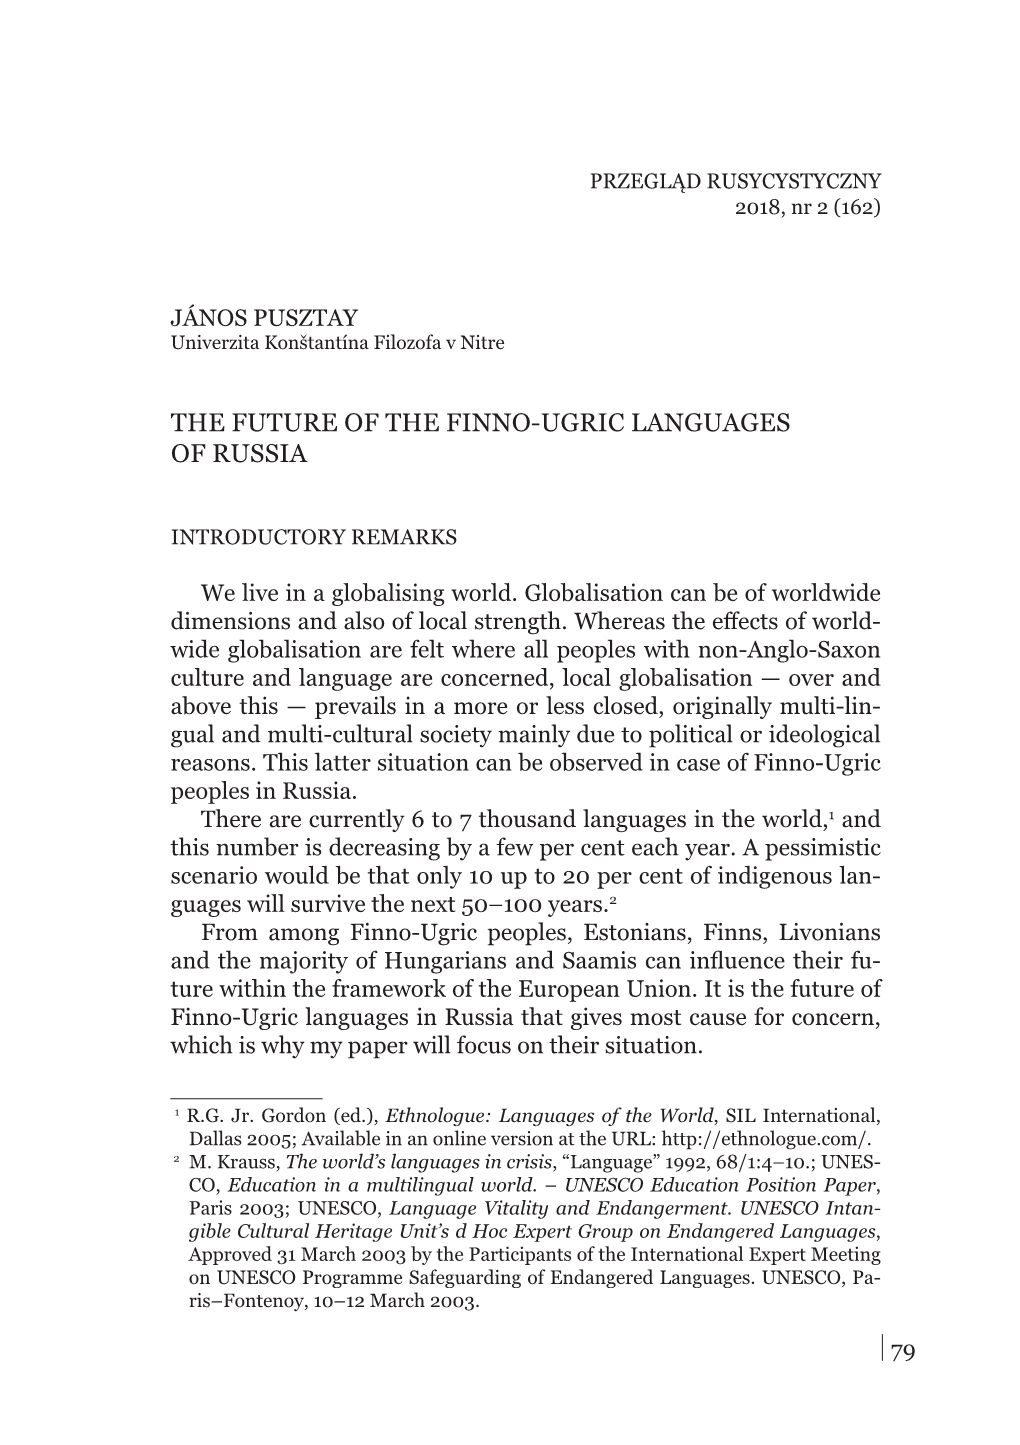 The Future of the Finno-Ugric Languages of Russia